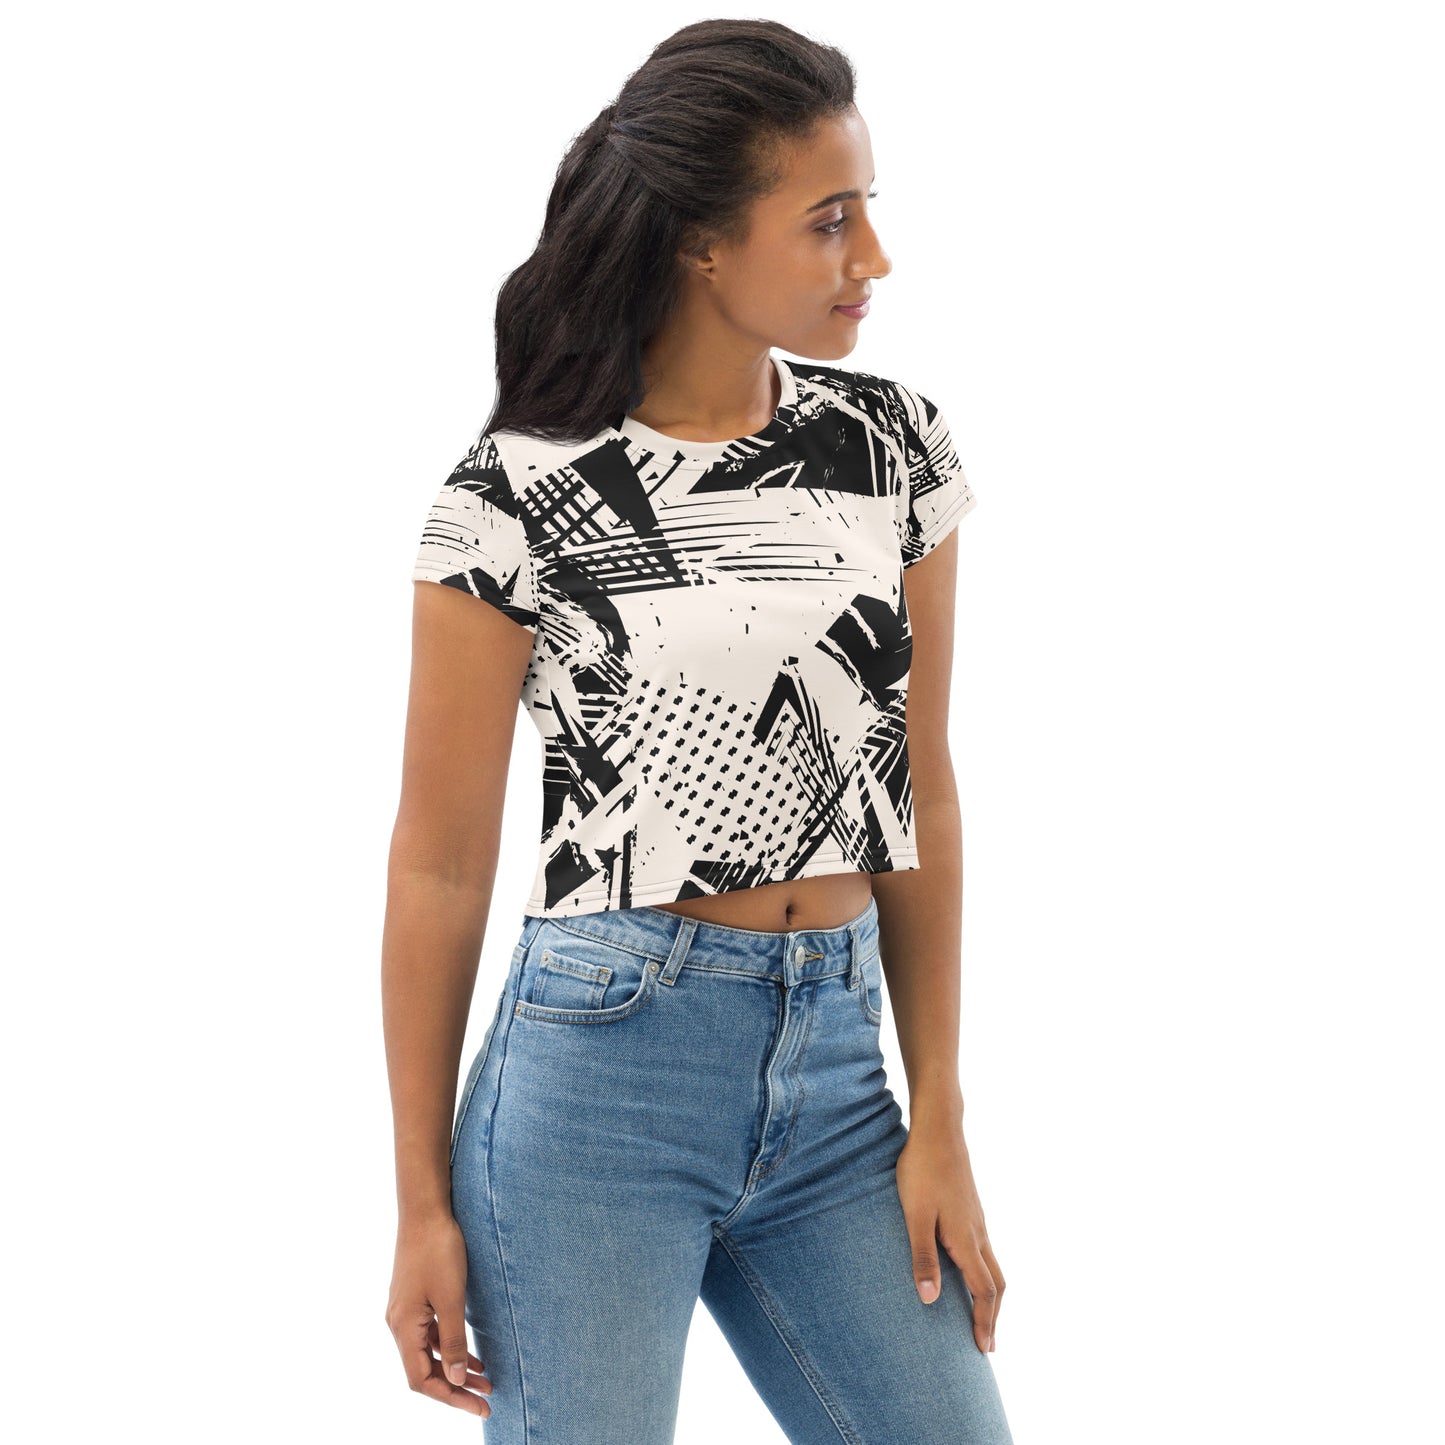 Women's Grunge Color Loss All-Over Print Crop Tee